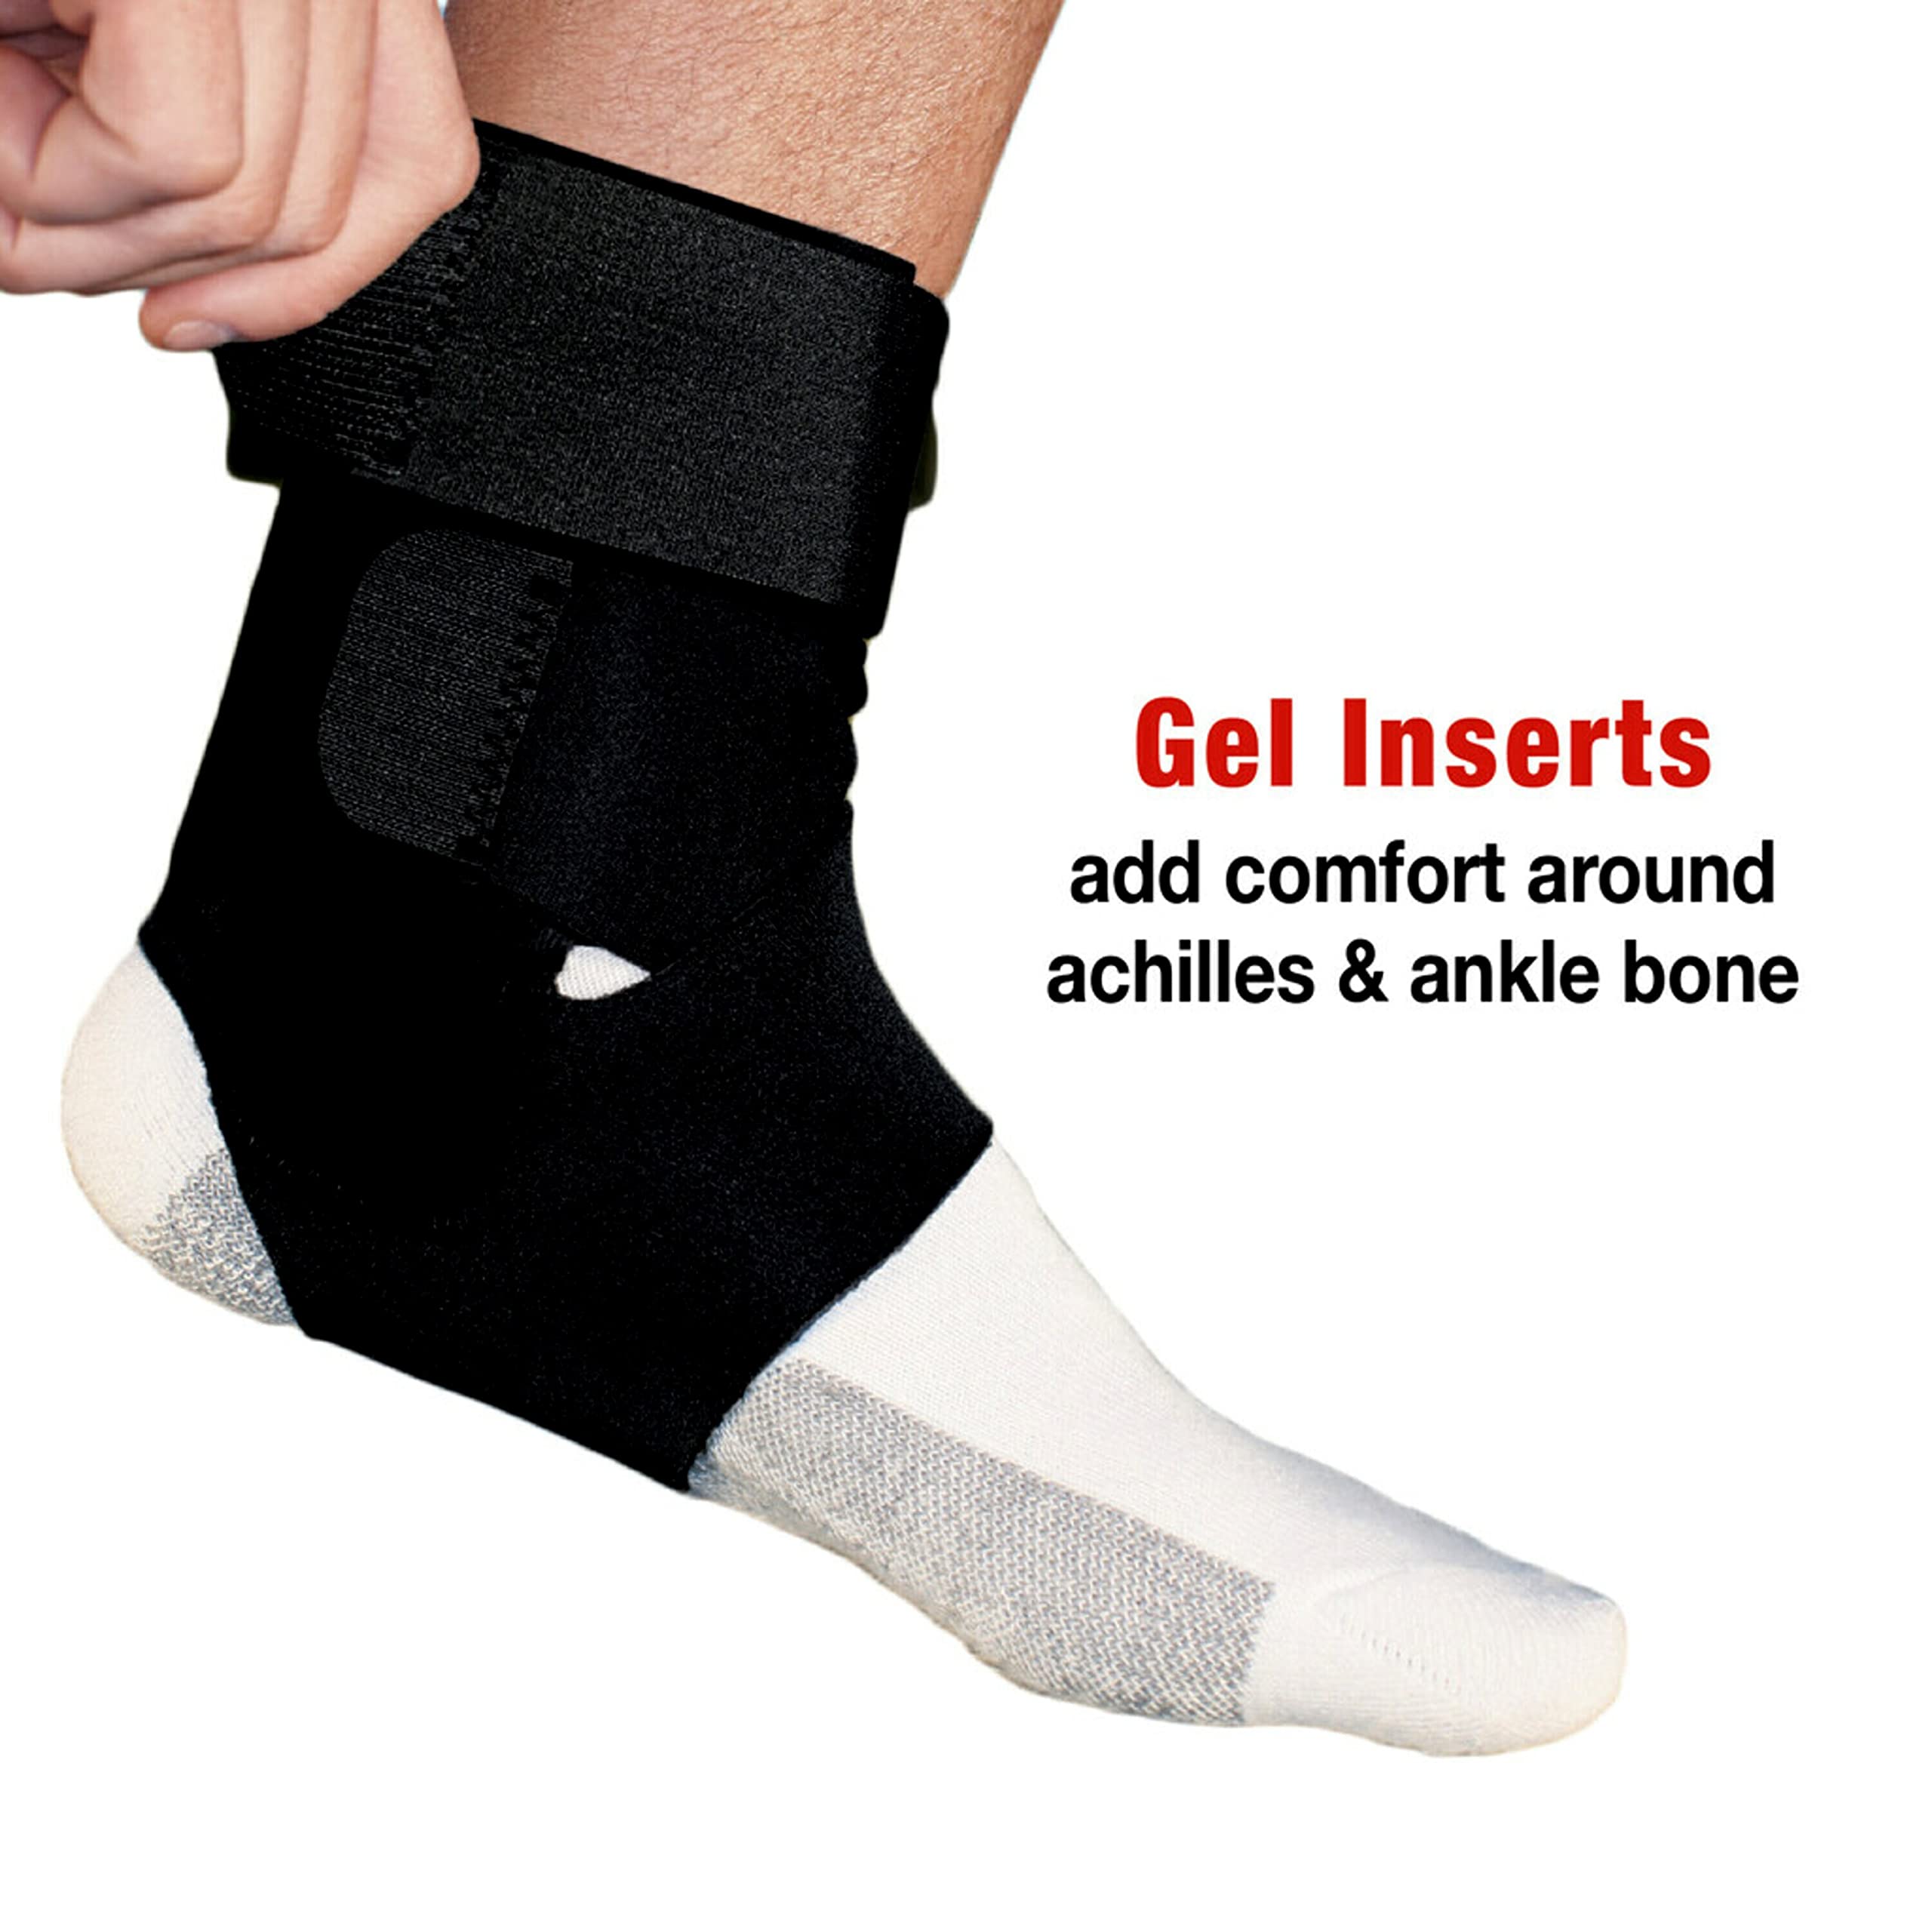 ACE Deluxe Ankle Stabilizer, Adjustable, Black, 1/Pack